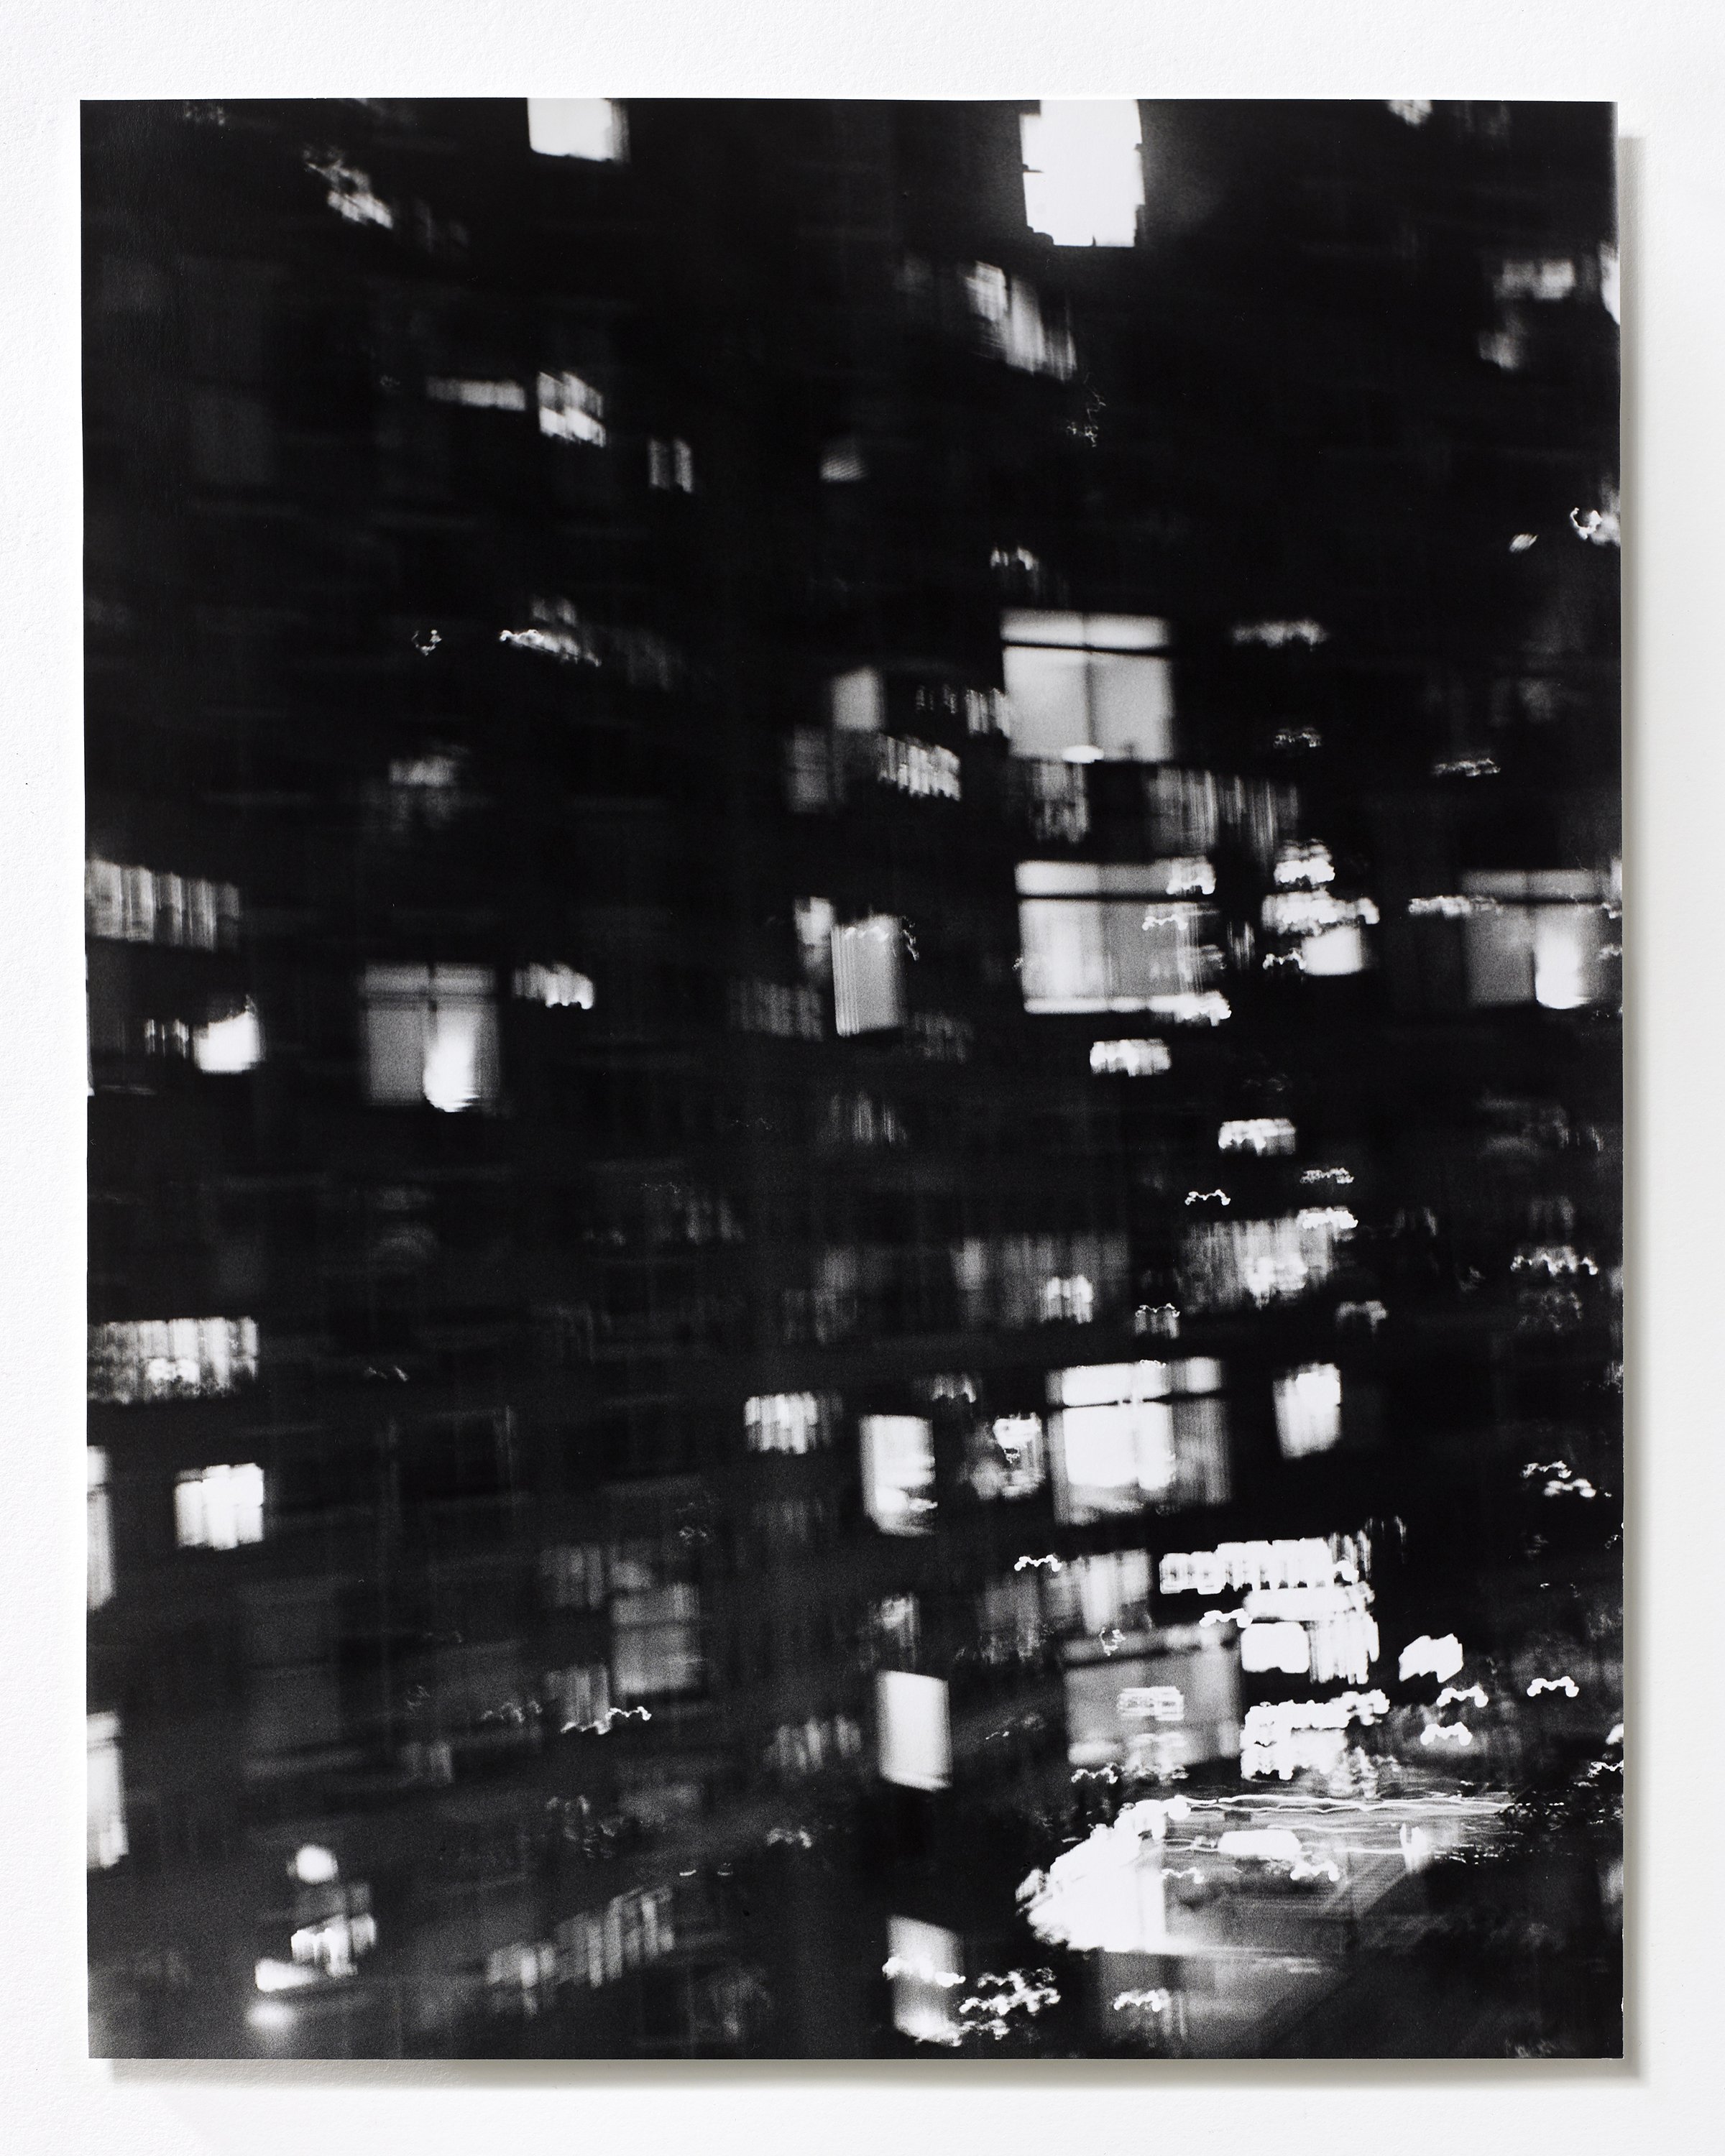 "Rooftop on 34th Street, facing North, #02, 8:54pm"